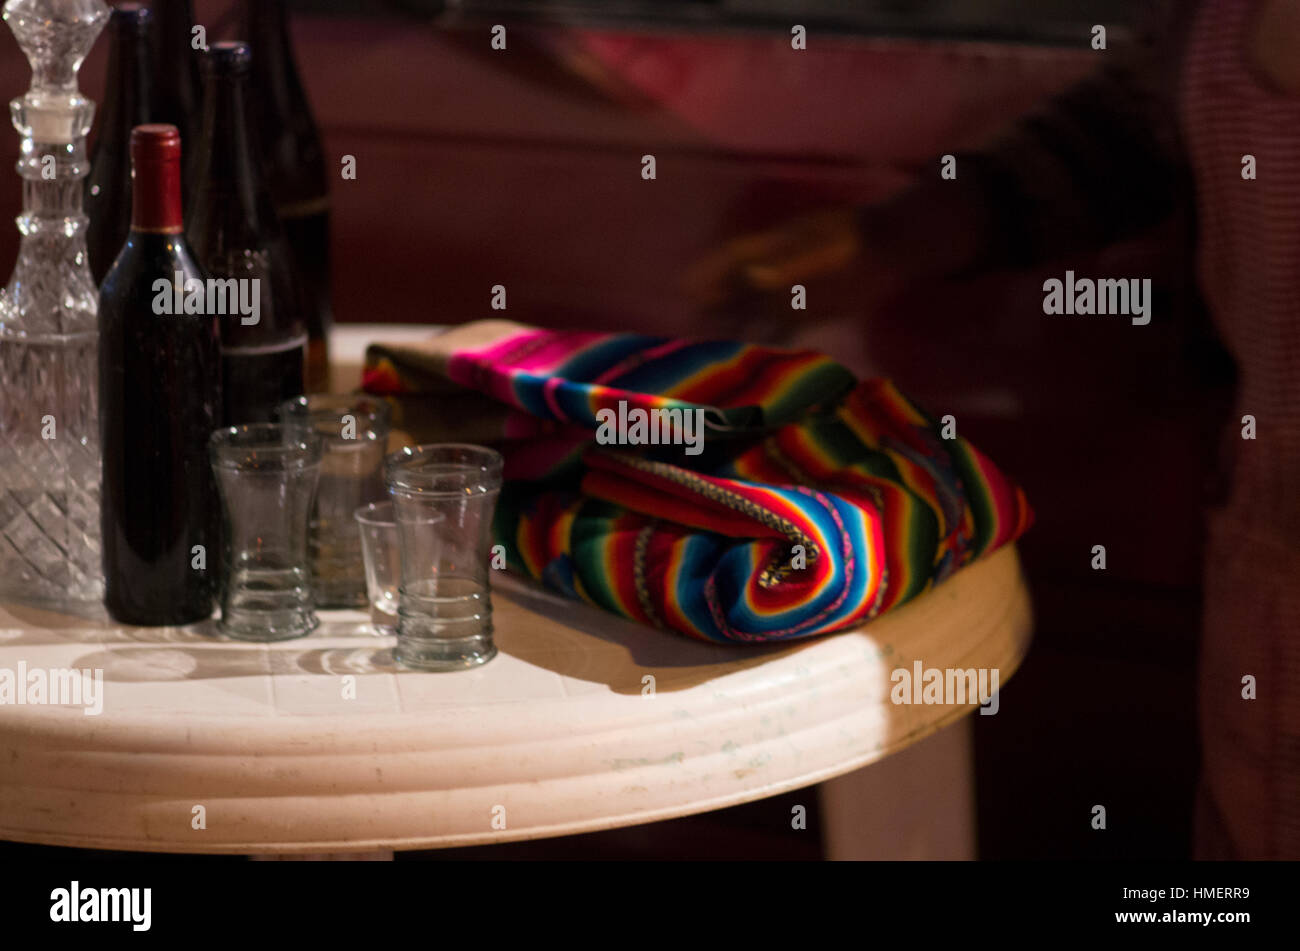 Colourful wayu, a Bolivian llama wool blanket, on a table next to a carafe, a bottle of red wine and some glasses Stock Photo